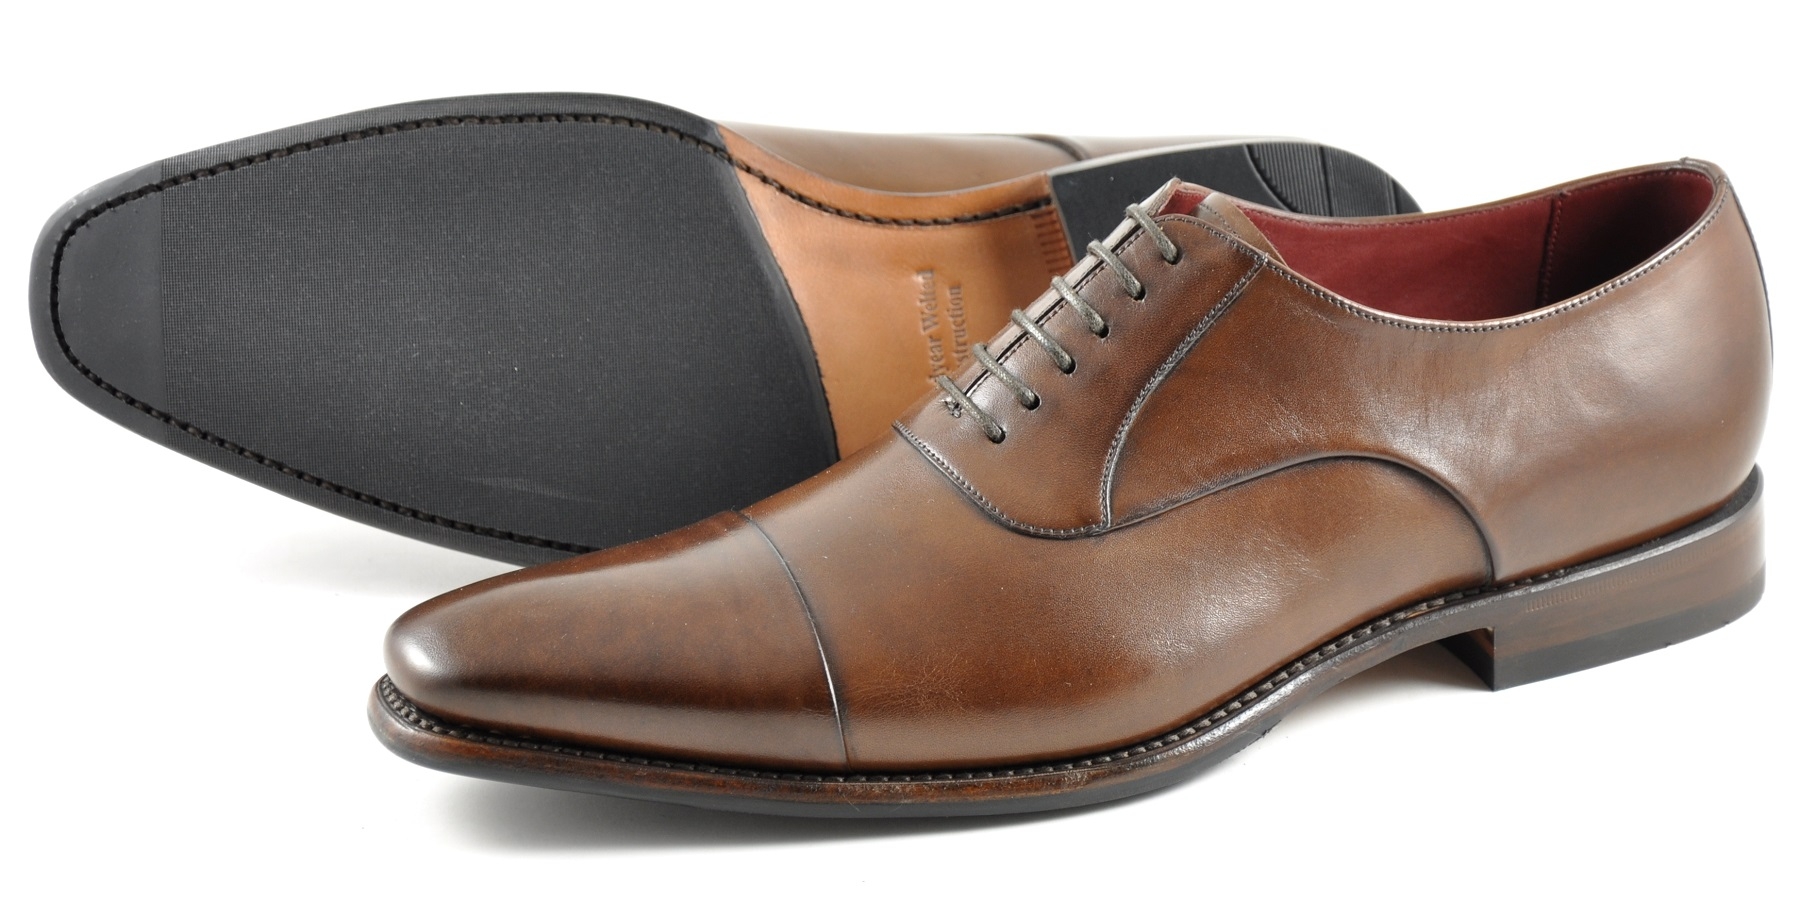 Loake Snyder Brown - The Ilkley Shoe 